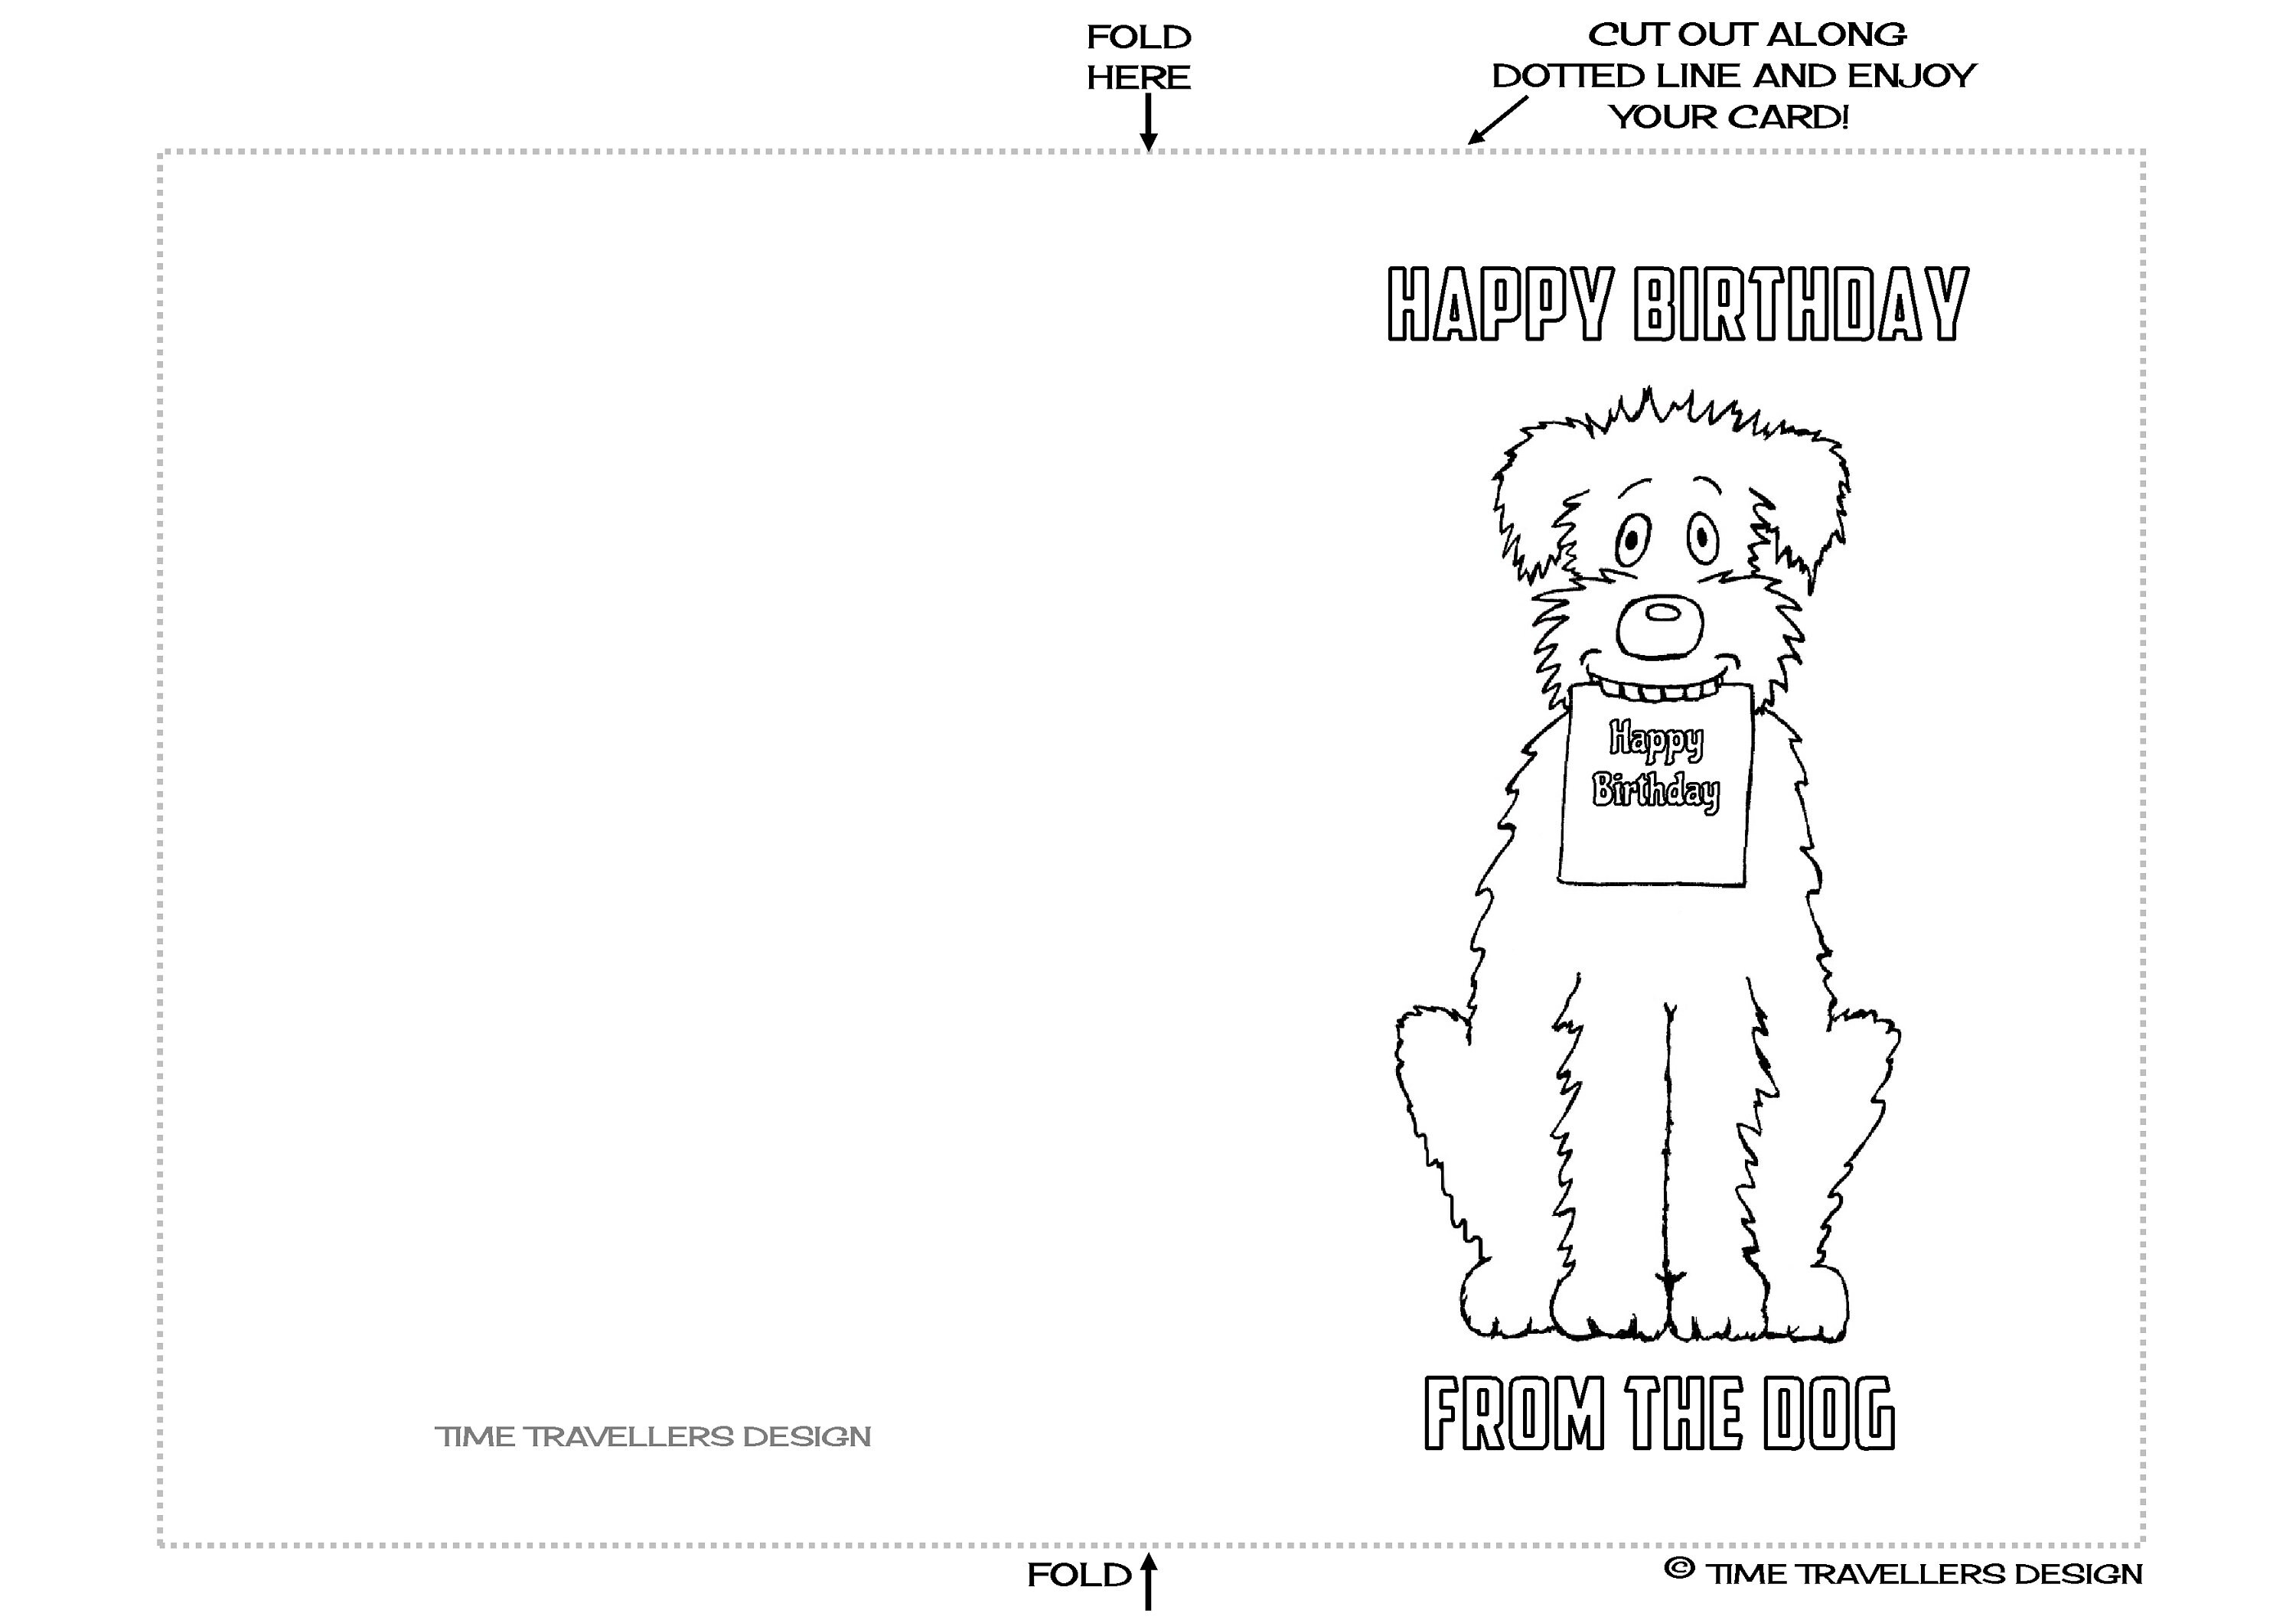 Printable birthday card to colour in happy birthday from the dog cartoon dog great fun for kids of all ages pdf instant download